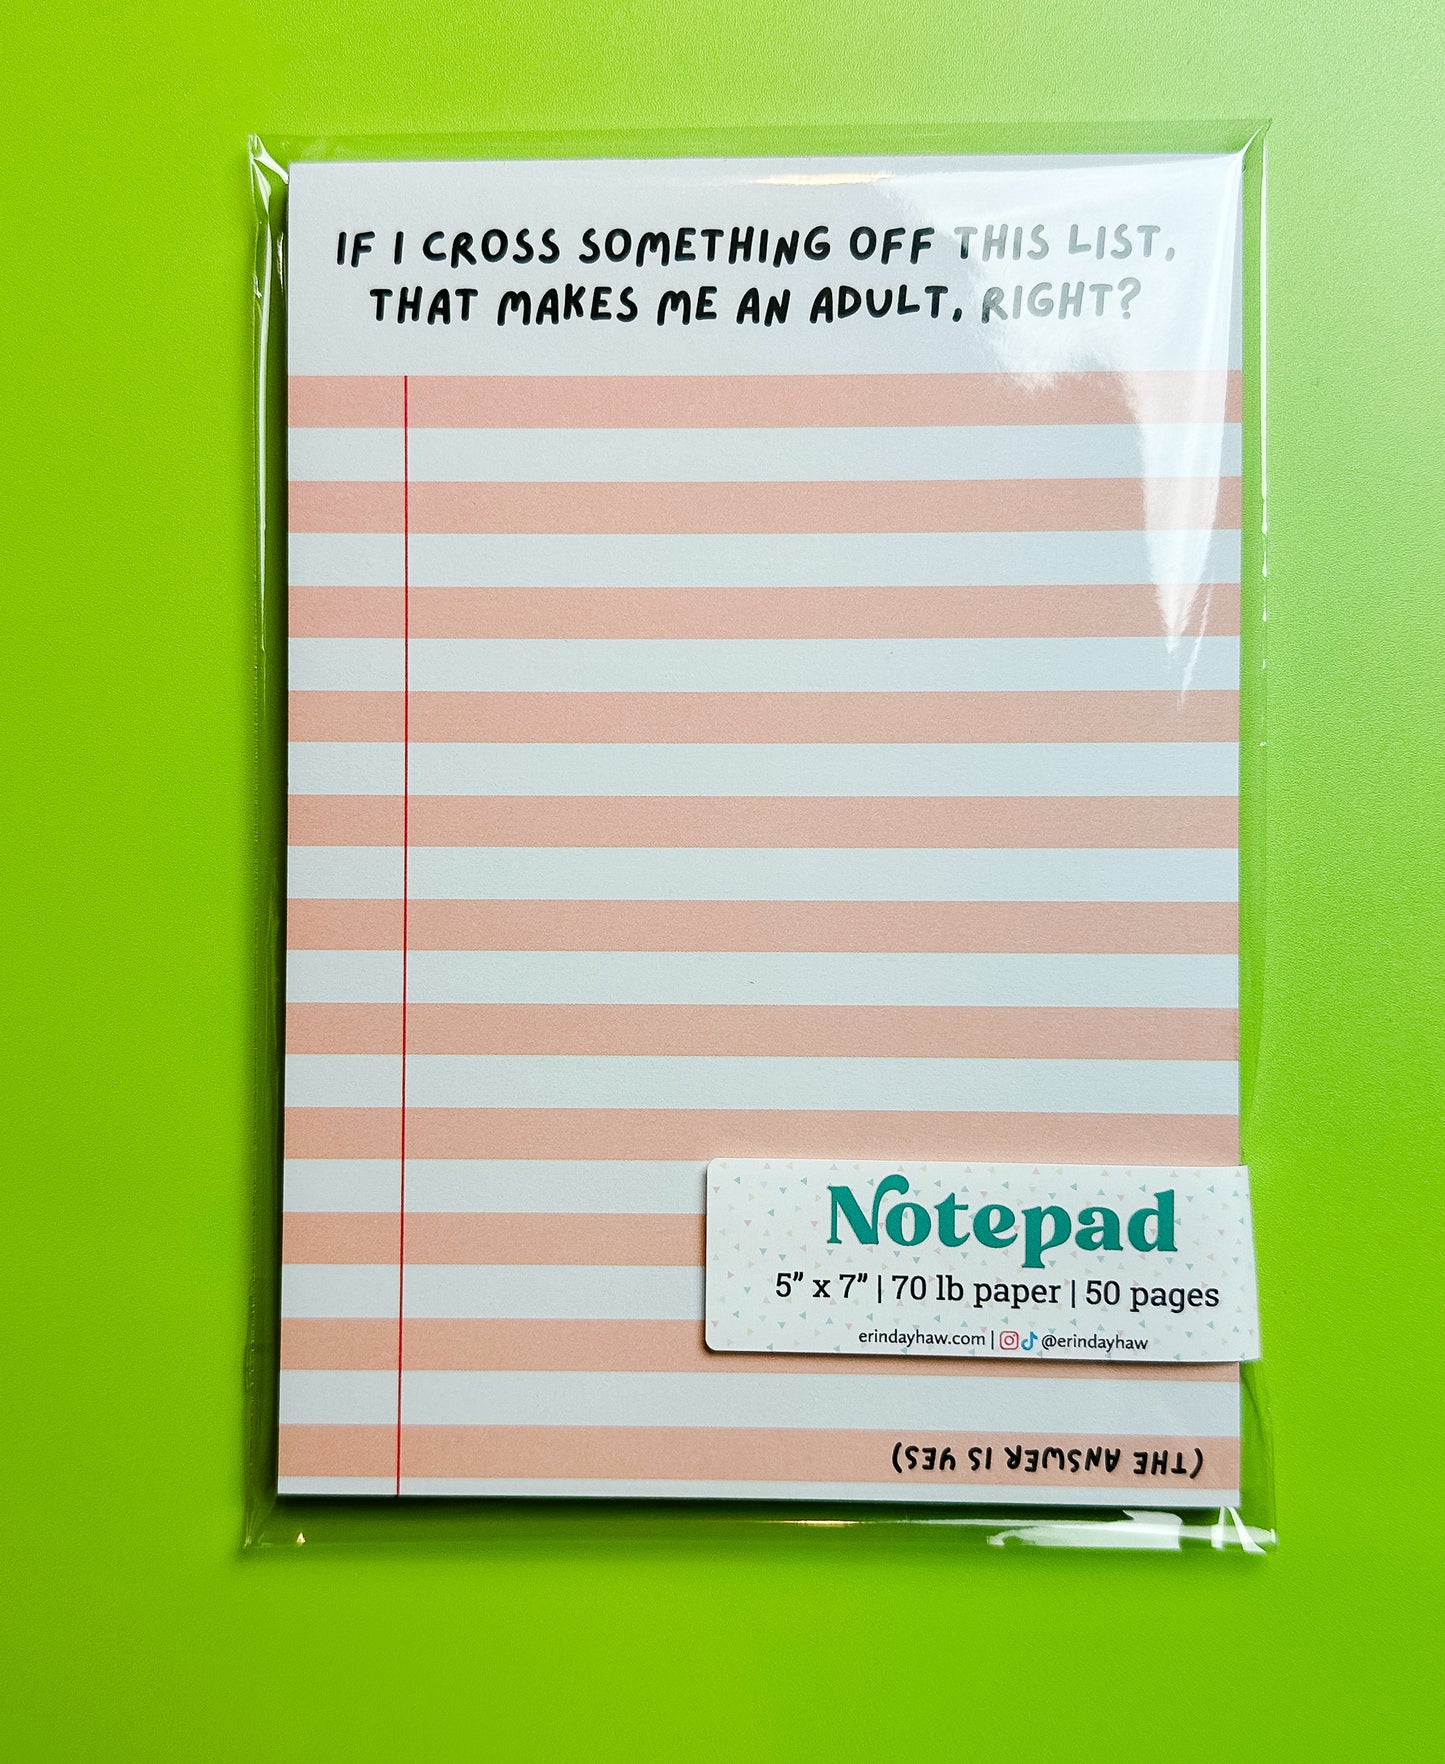 That Makes Me an Adult, right? Notepad